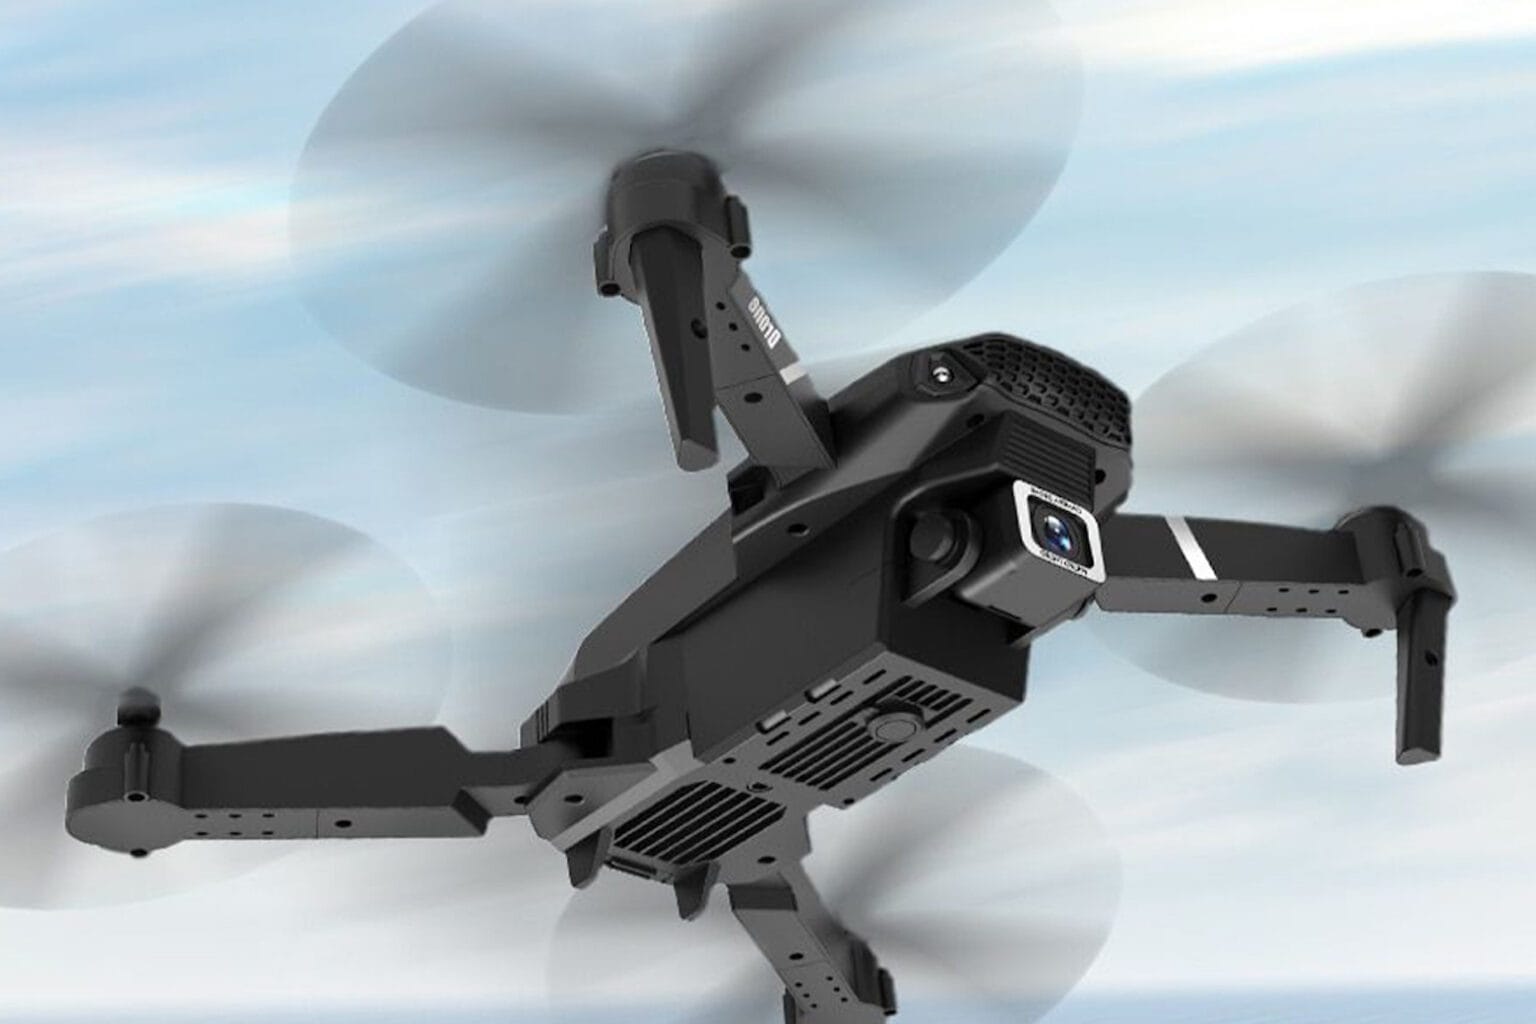 Control this drone from your smartphone and take amazing 4k photos and videos.